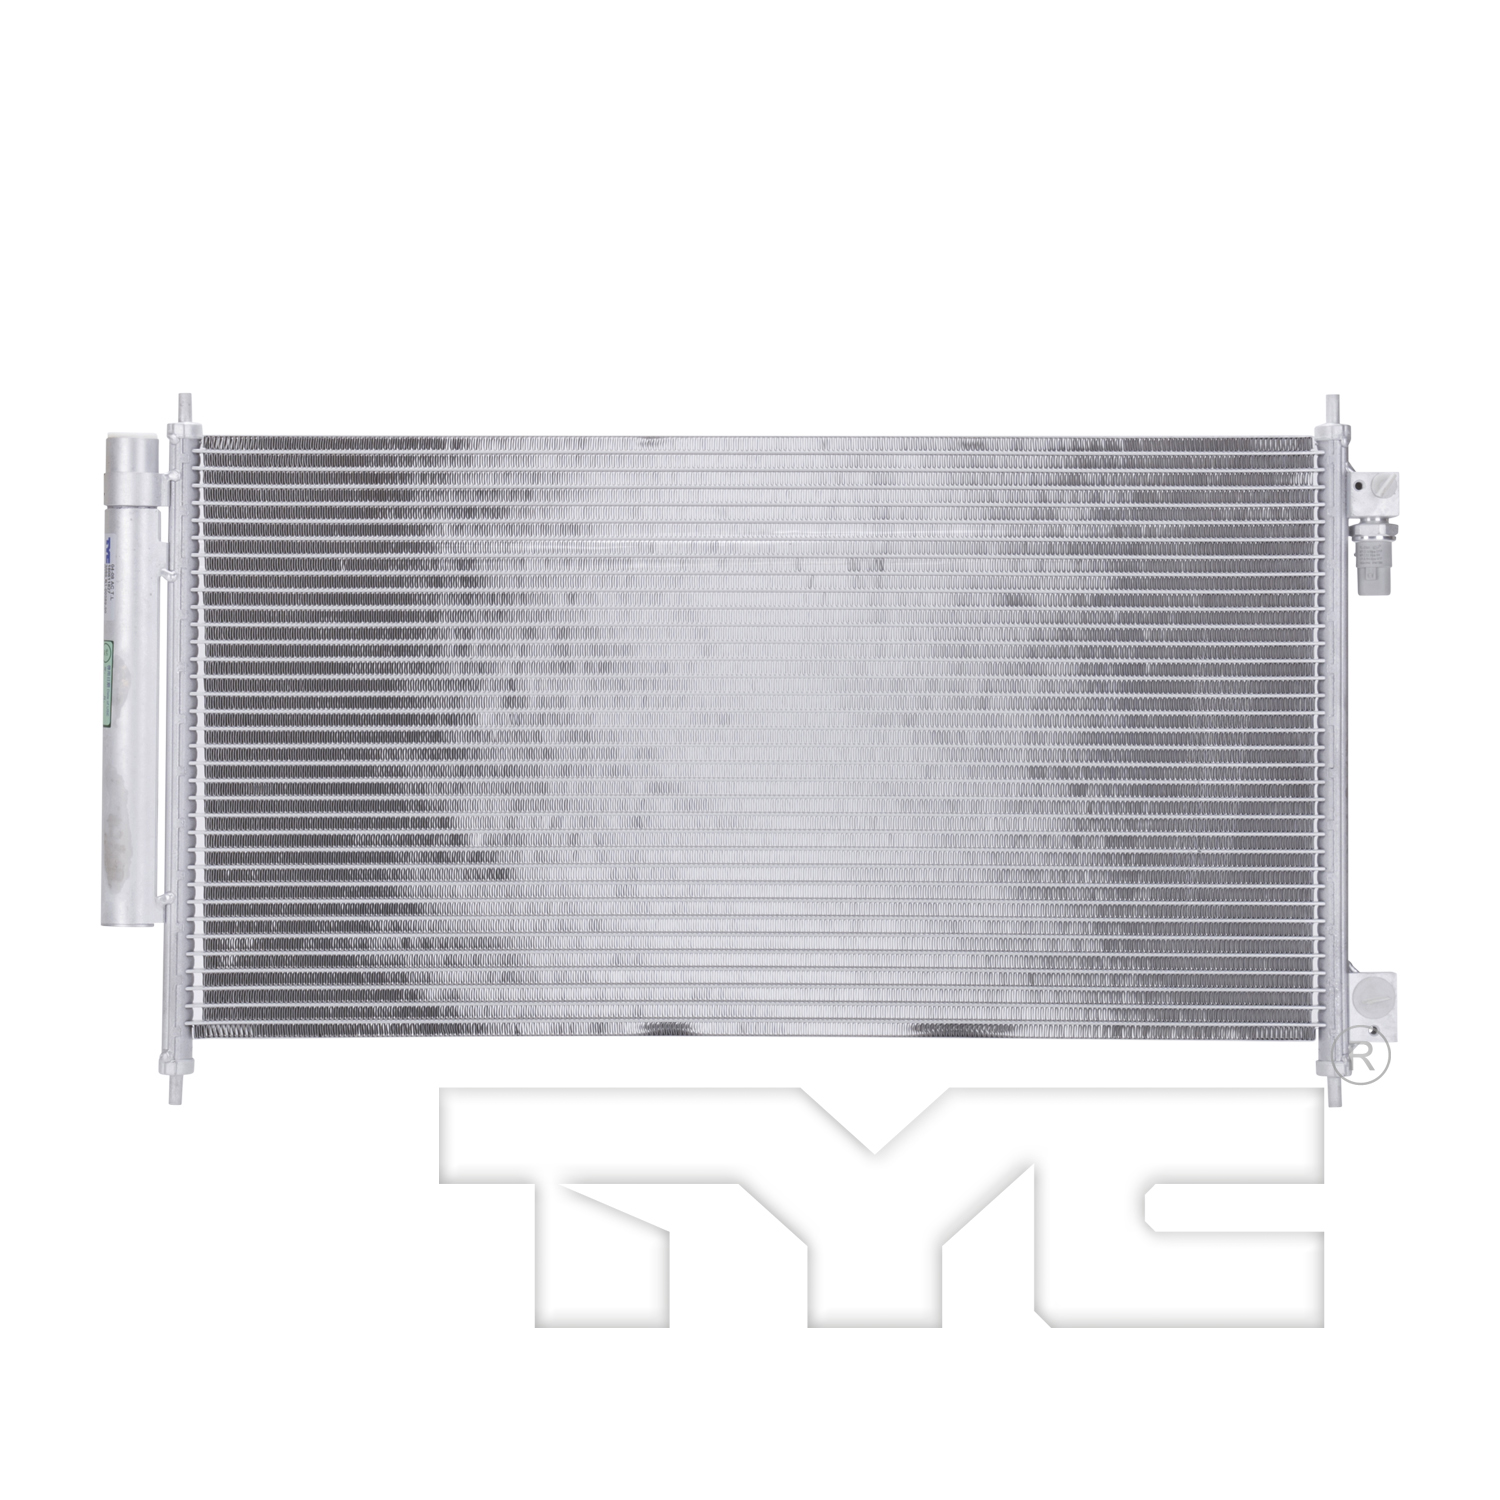 Aftermarket AC CONDENSERS for ACURA - TL, TL,04-08,Air conditioning condenser